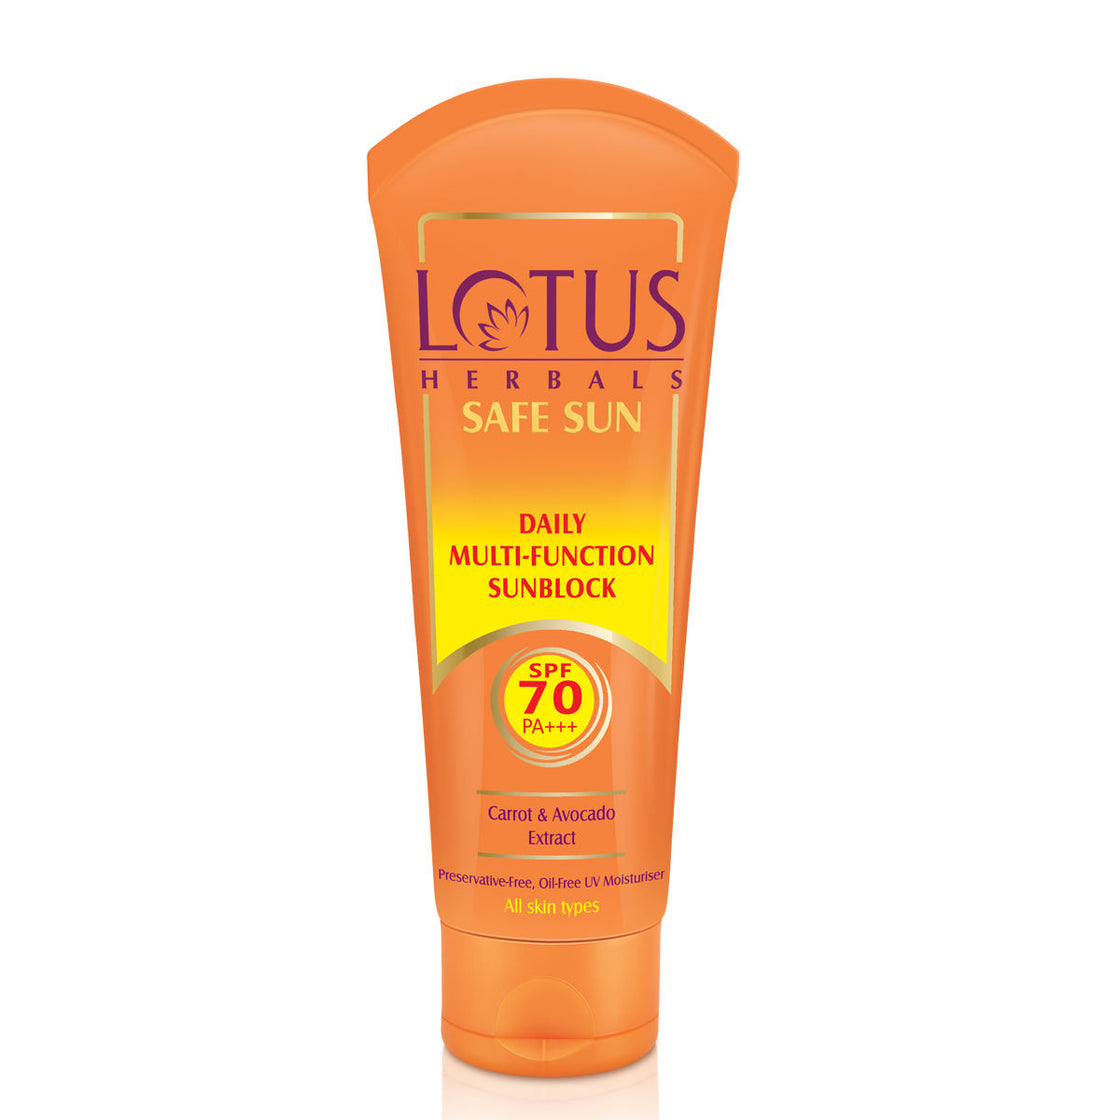 Lotus Herbals Safe Sun Daily Multi-Function Sunscreen SPF 70 PA+++